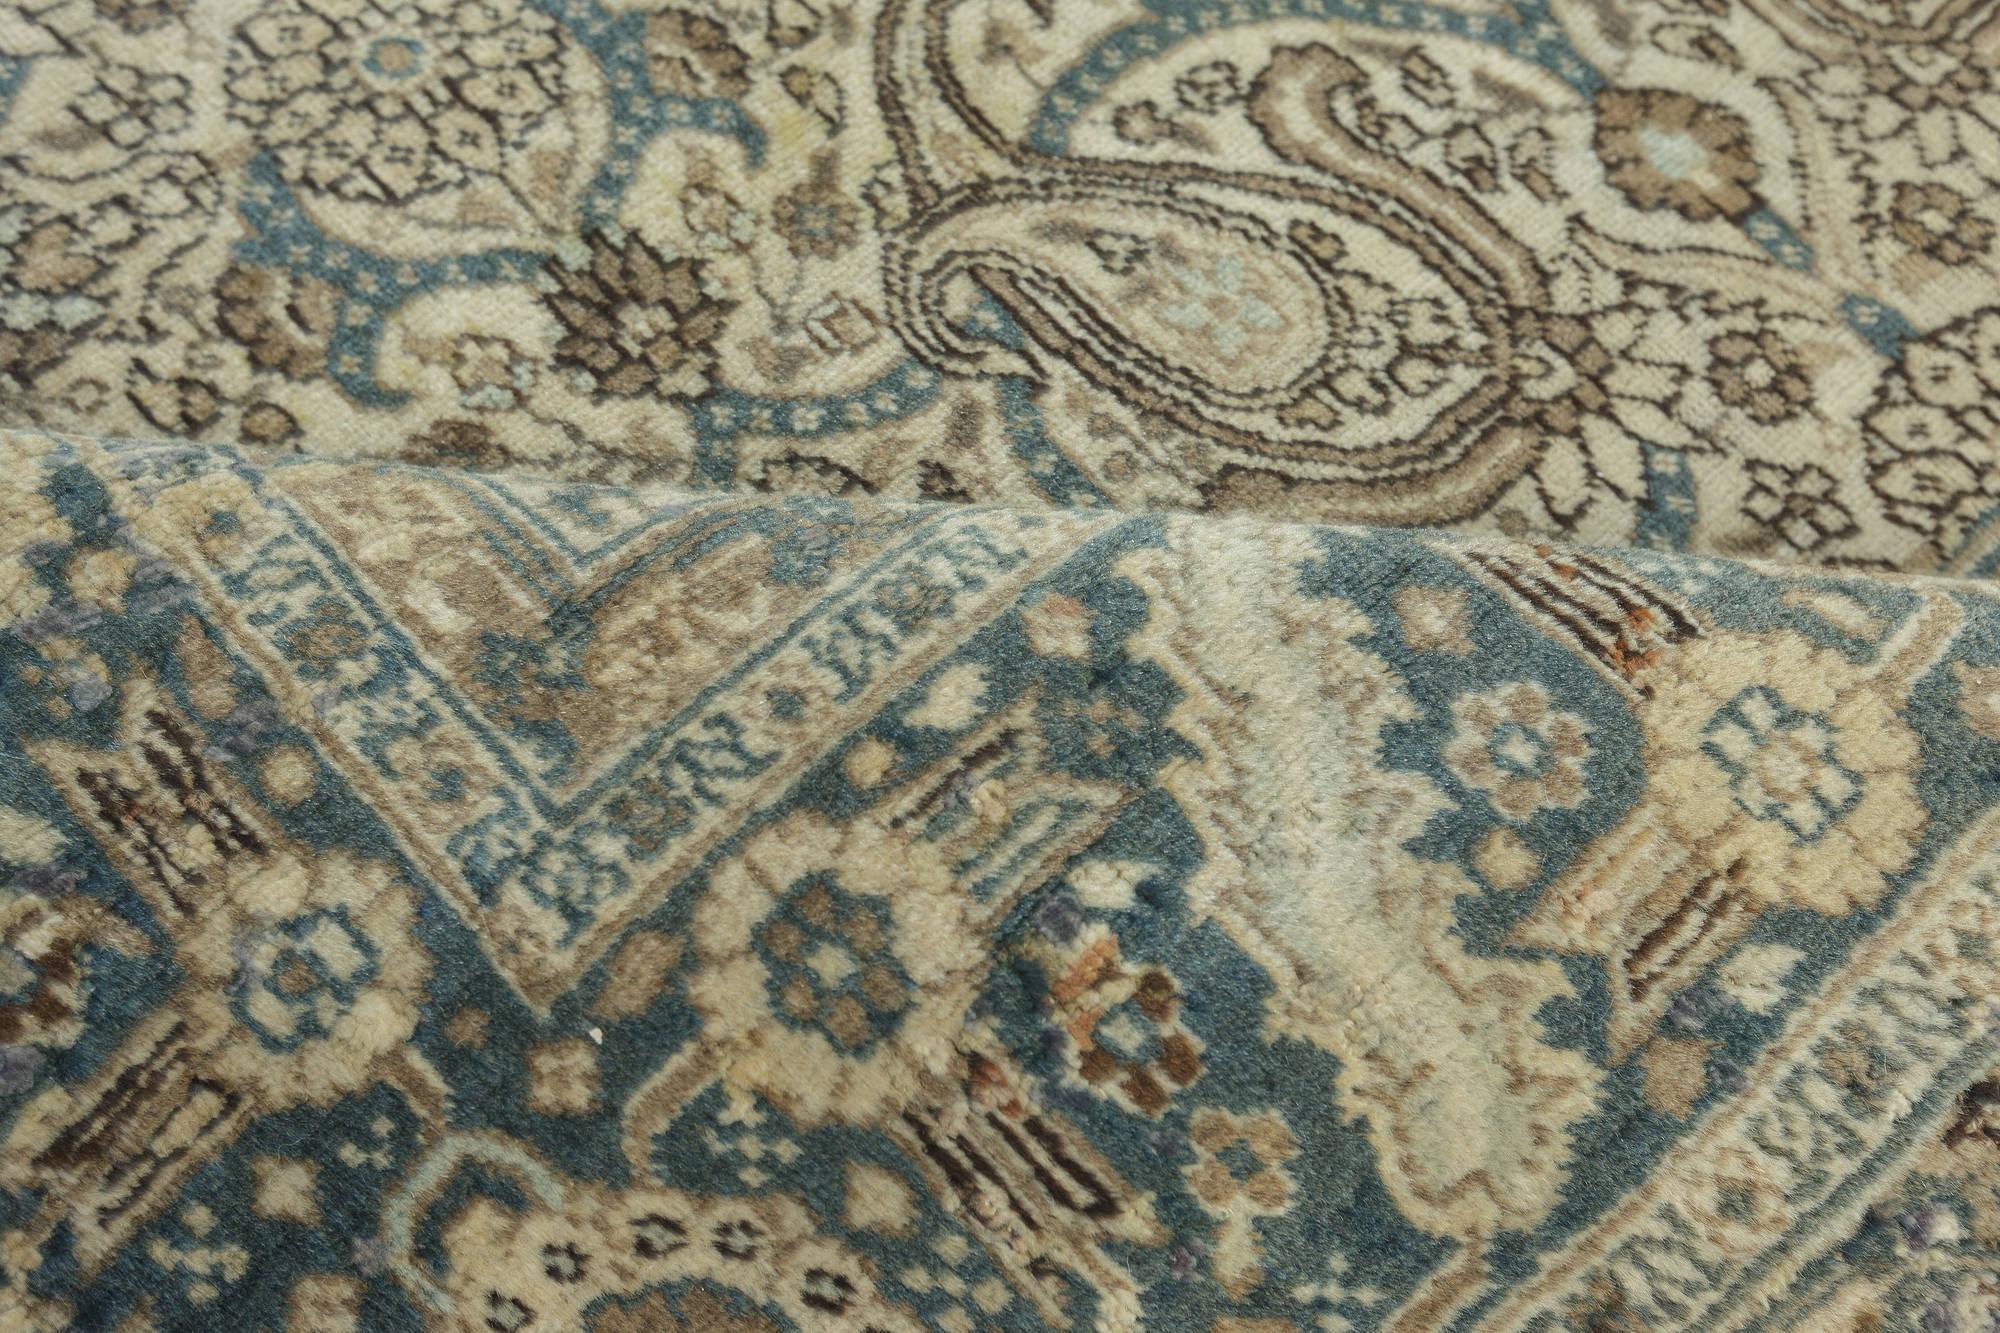 Authentic Persian Tabriz rug in Beige, Blue, Brown, Gray
Size: 9'7